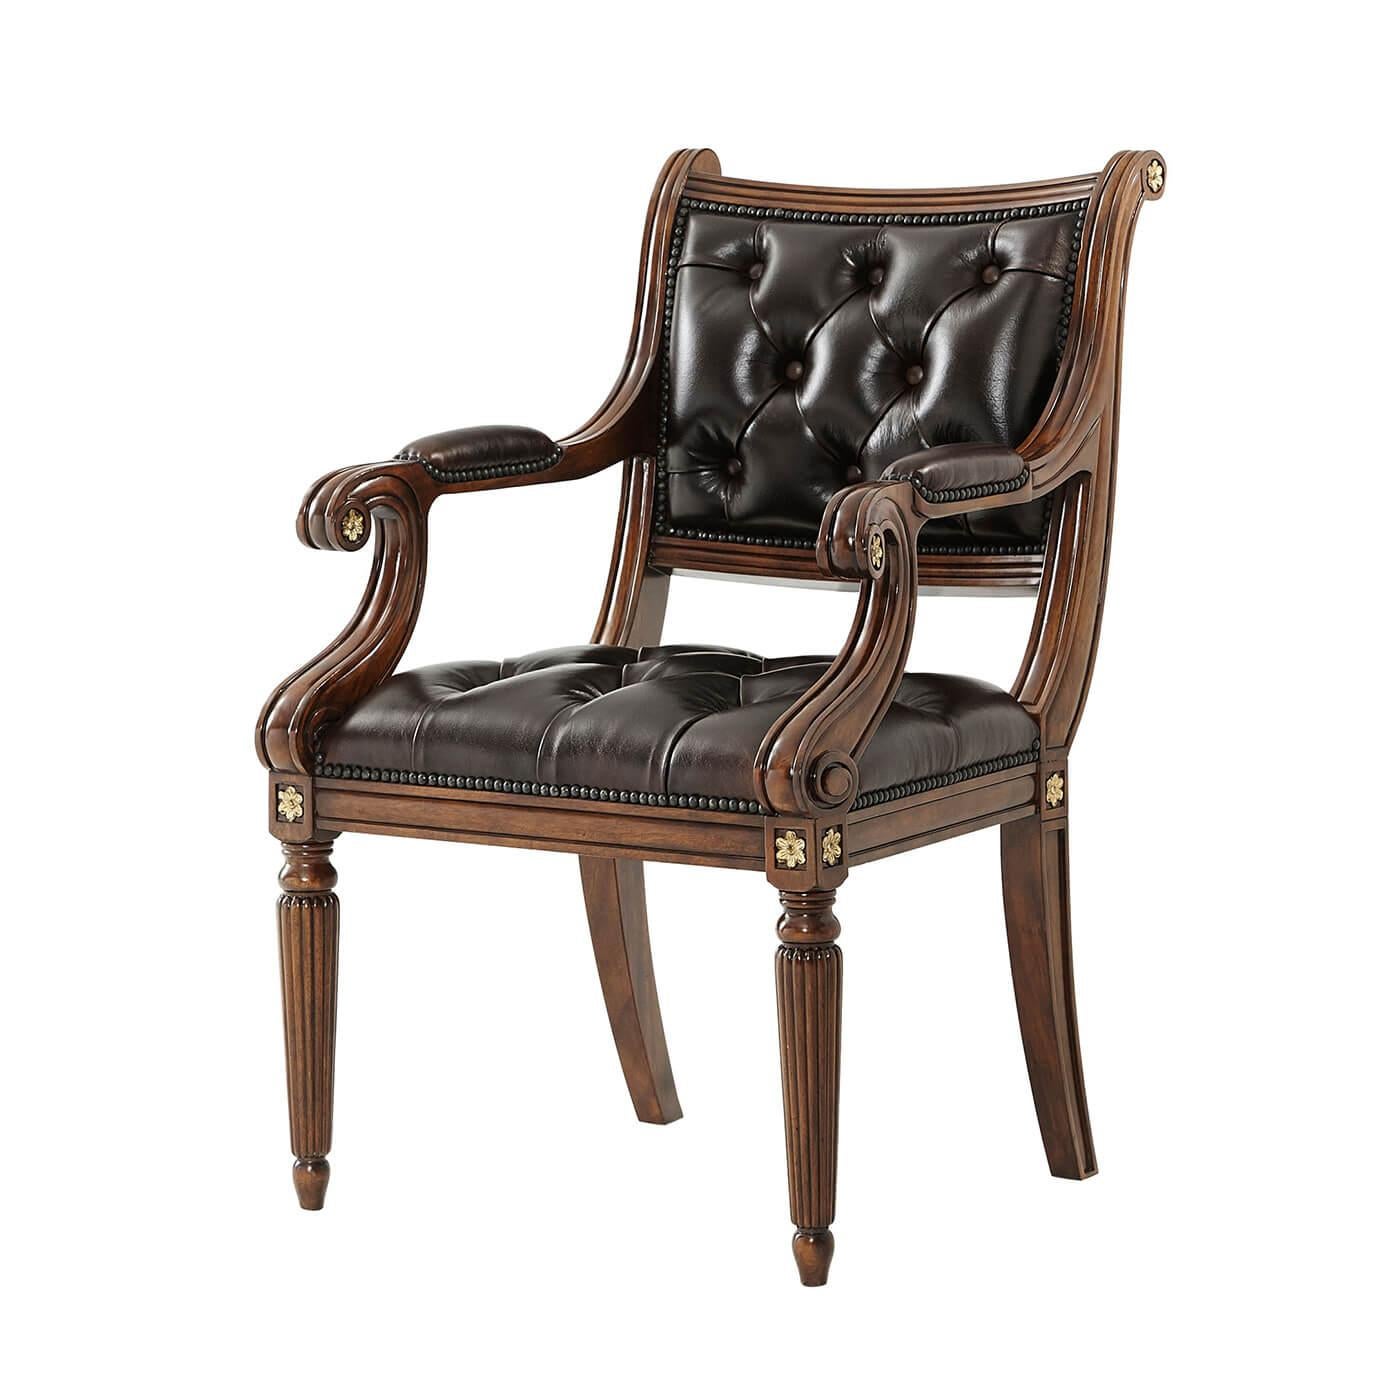 An English Regency style hand-carved library armchair, with an upholstered and tufted panel back and seat, with brass nailhead trim, scroll arms, on turned, tapered, and reeded legs. With a brown Old English leather upholstery. 

Dimensions: 24